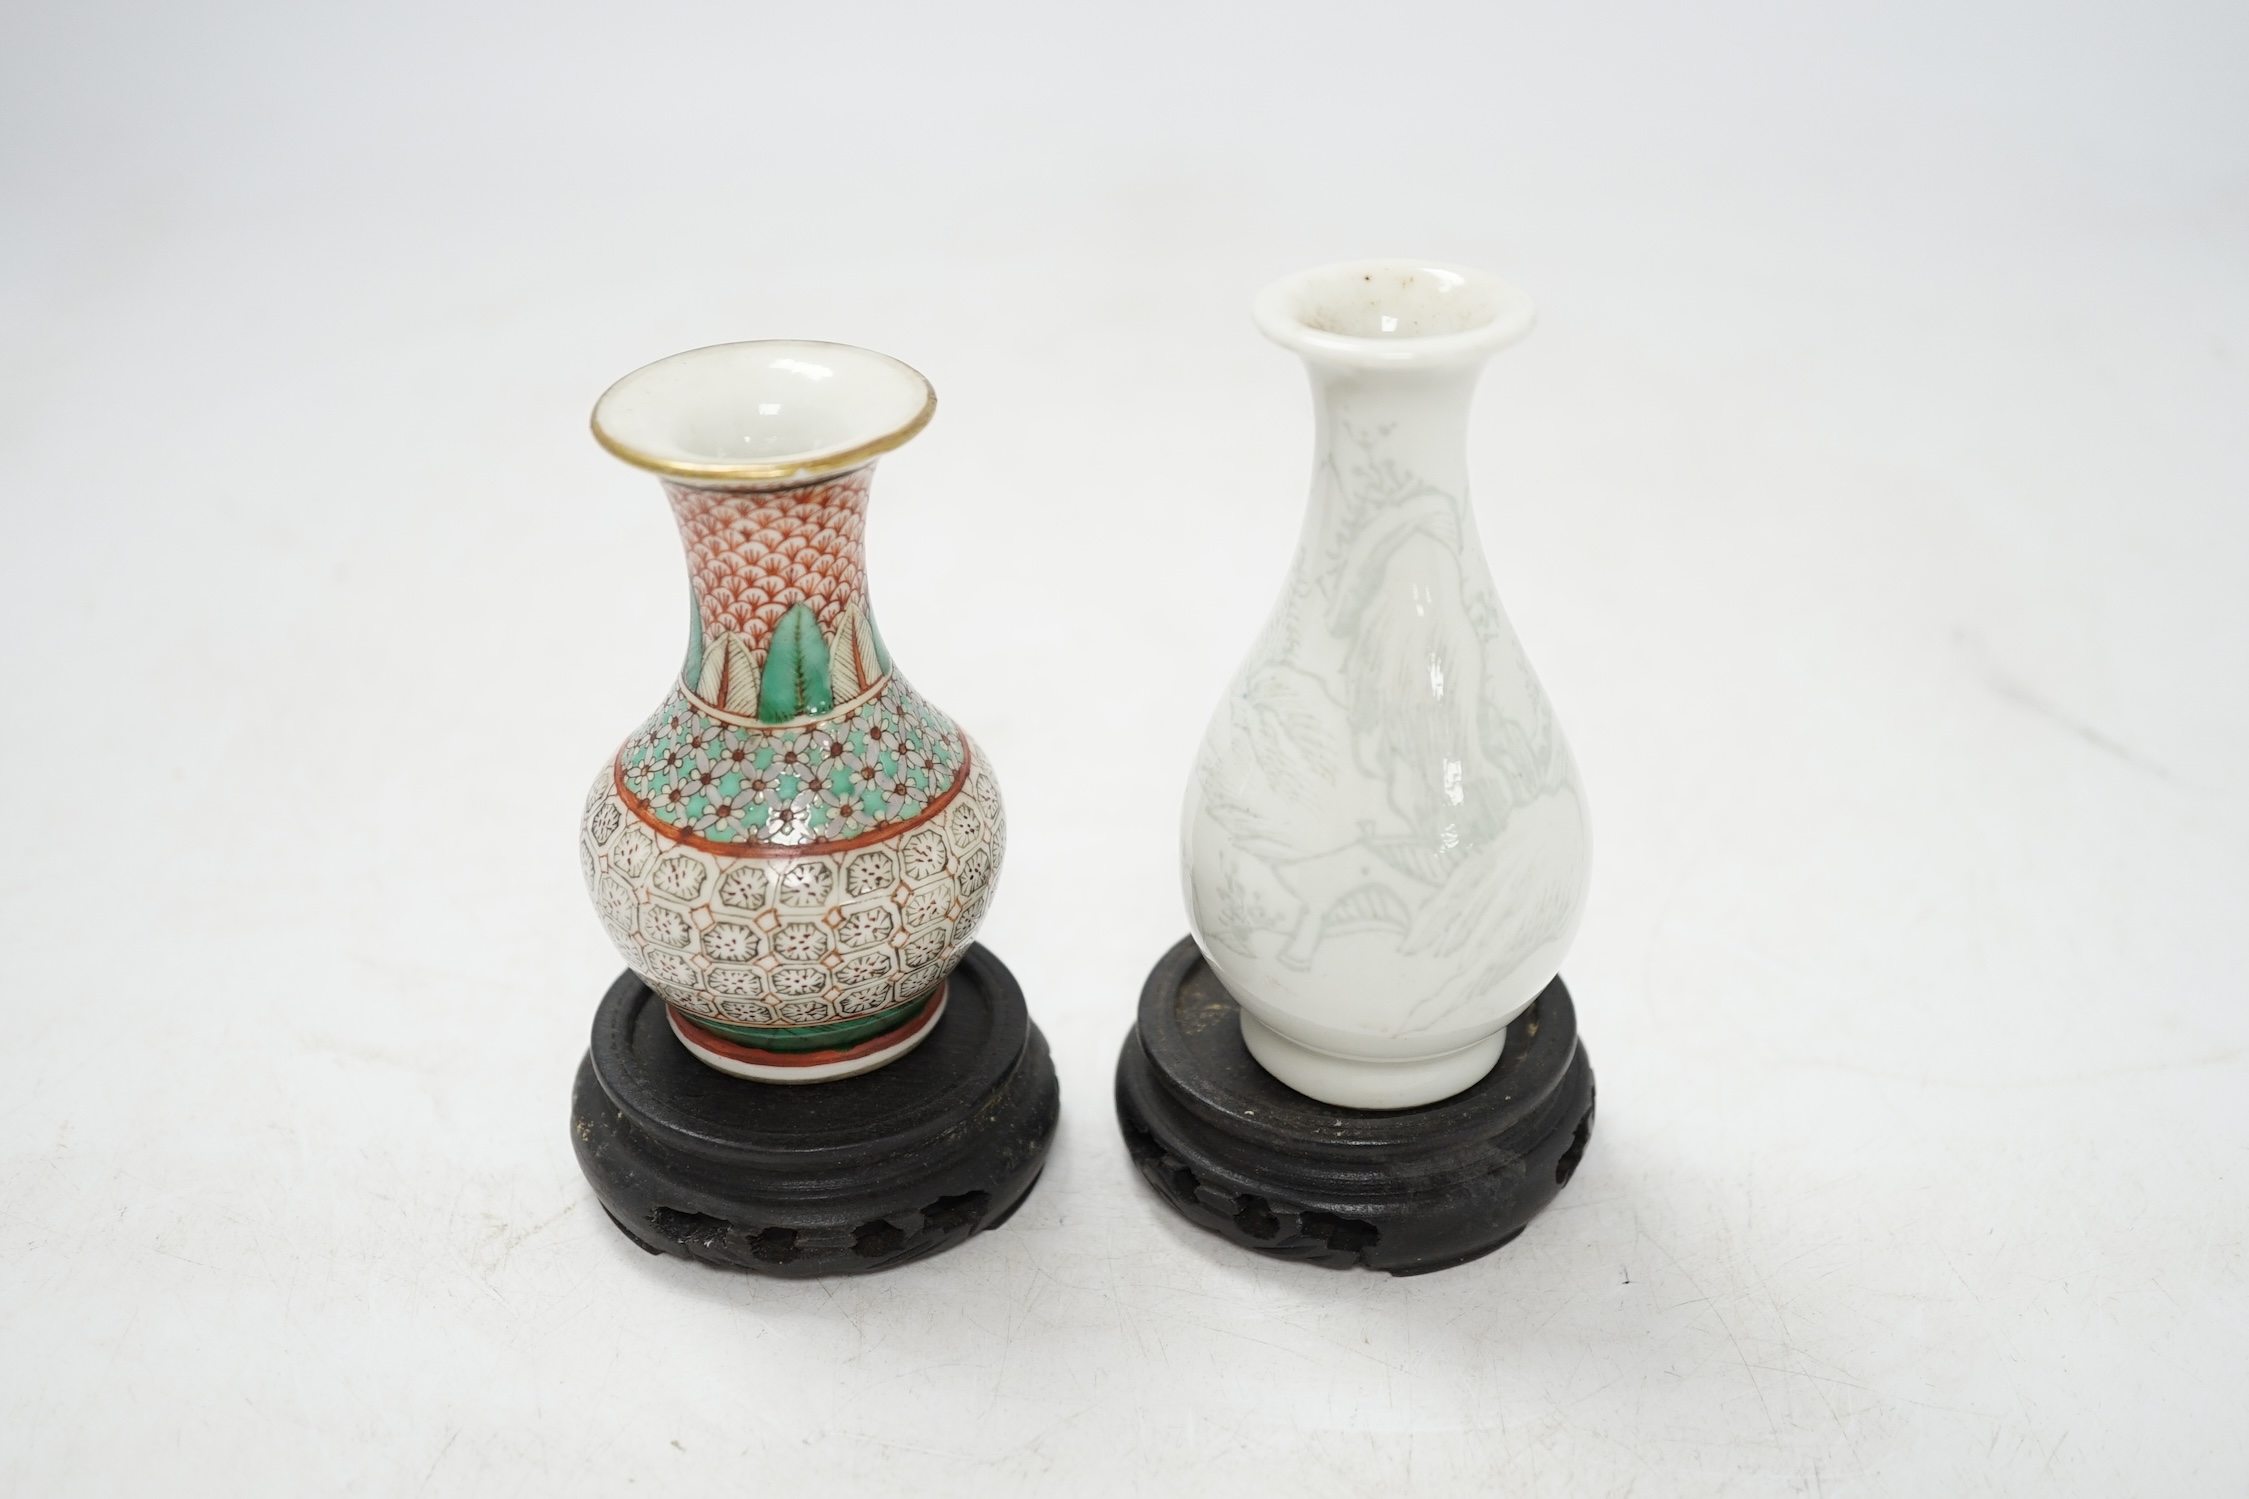 Two miniature Chinese porcelain vases, on hardwood stands, largest 9cm high. Condition - fair